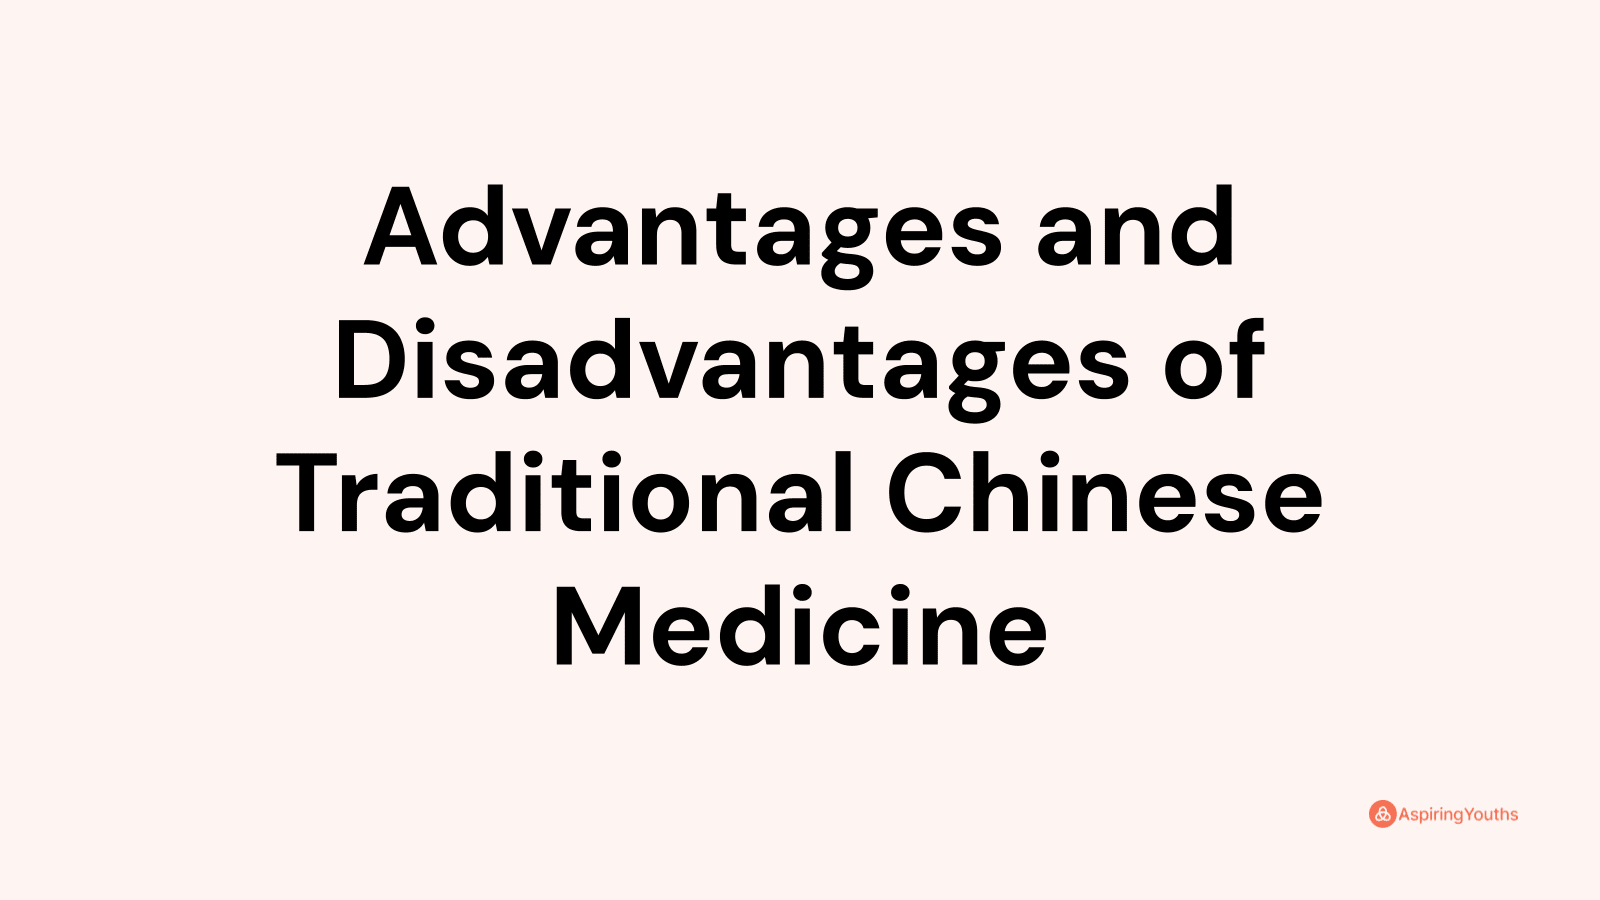 Advantages and disadvantages of Traditional Chinese Medicine